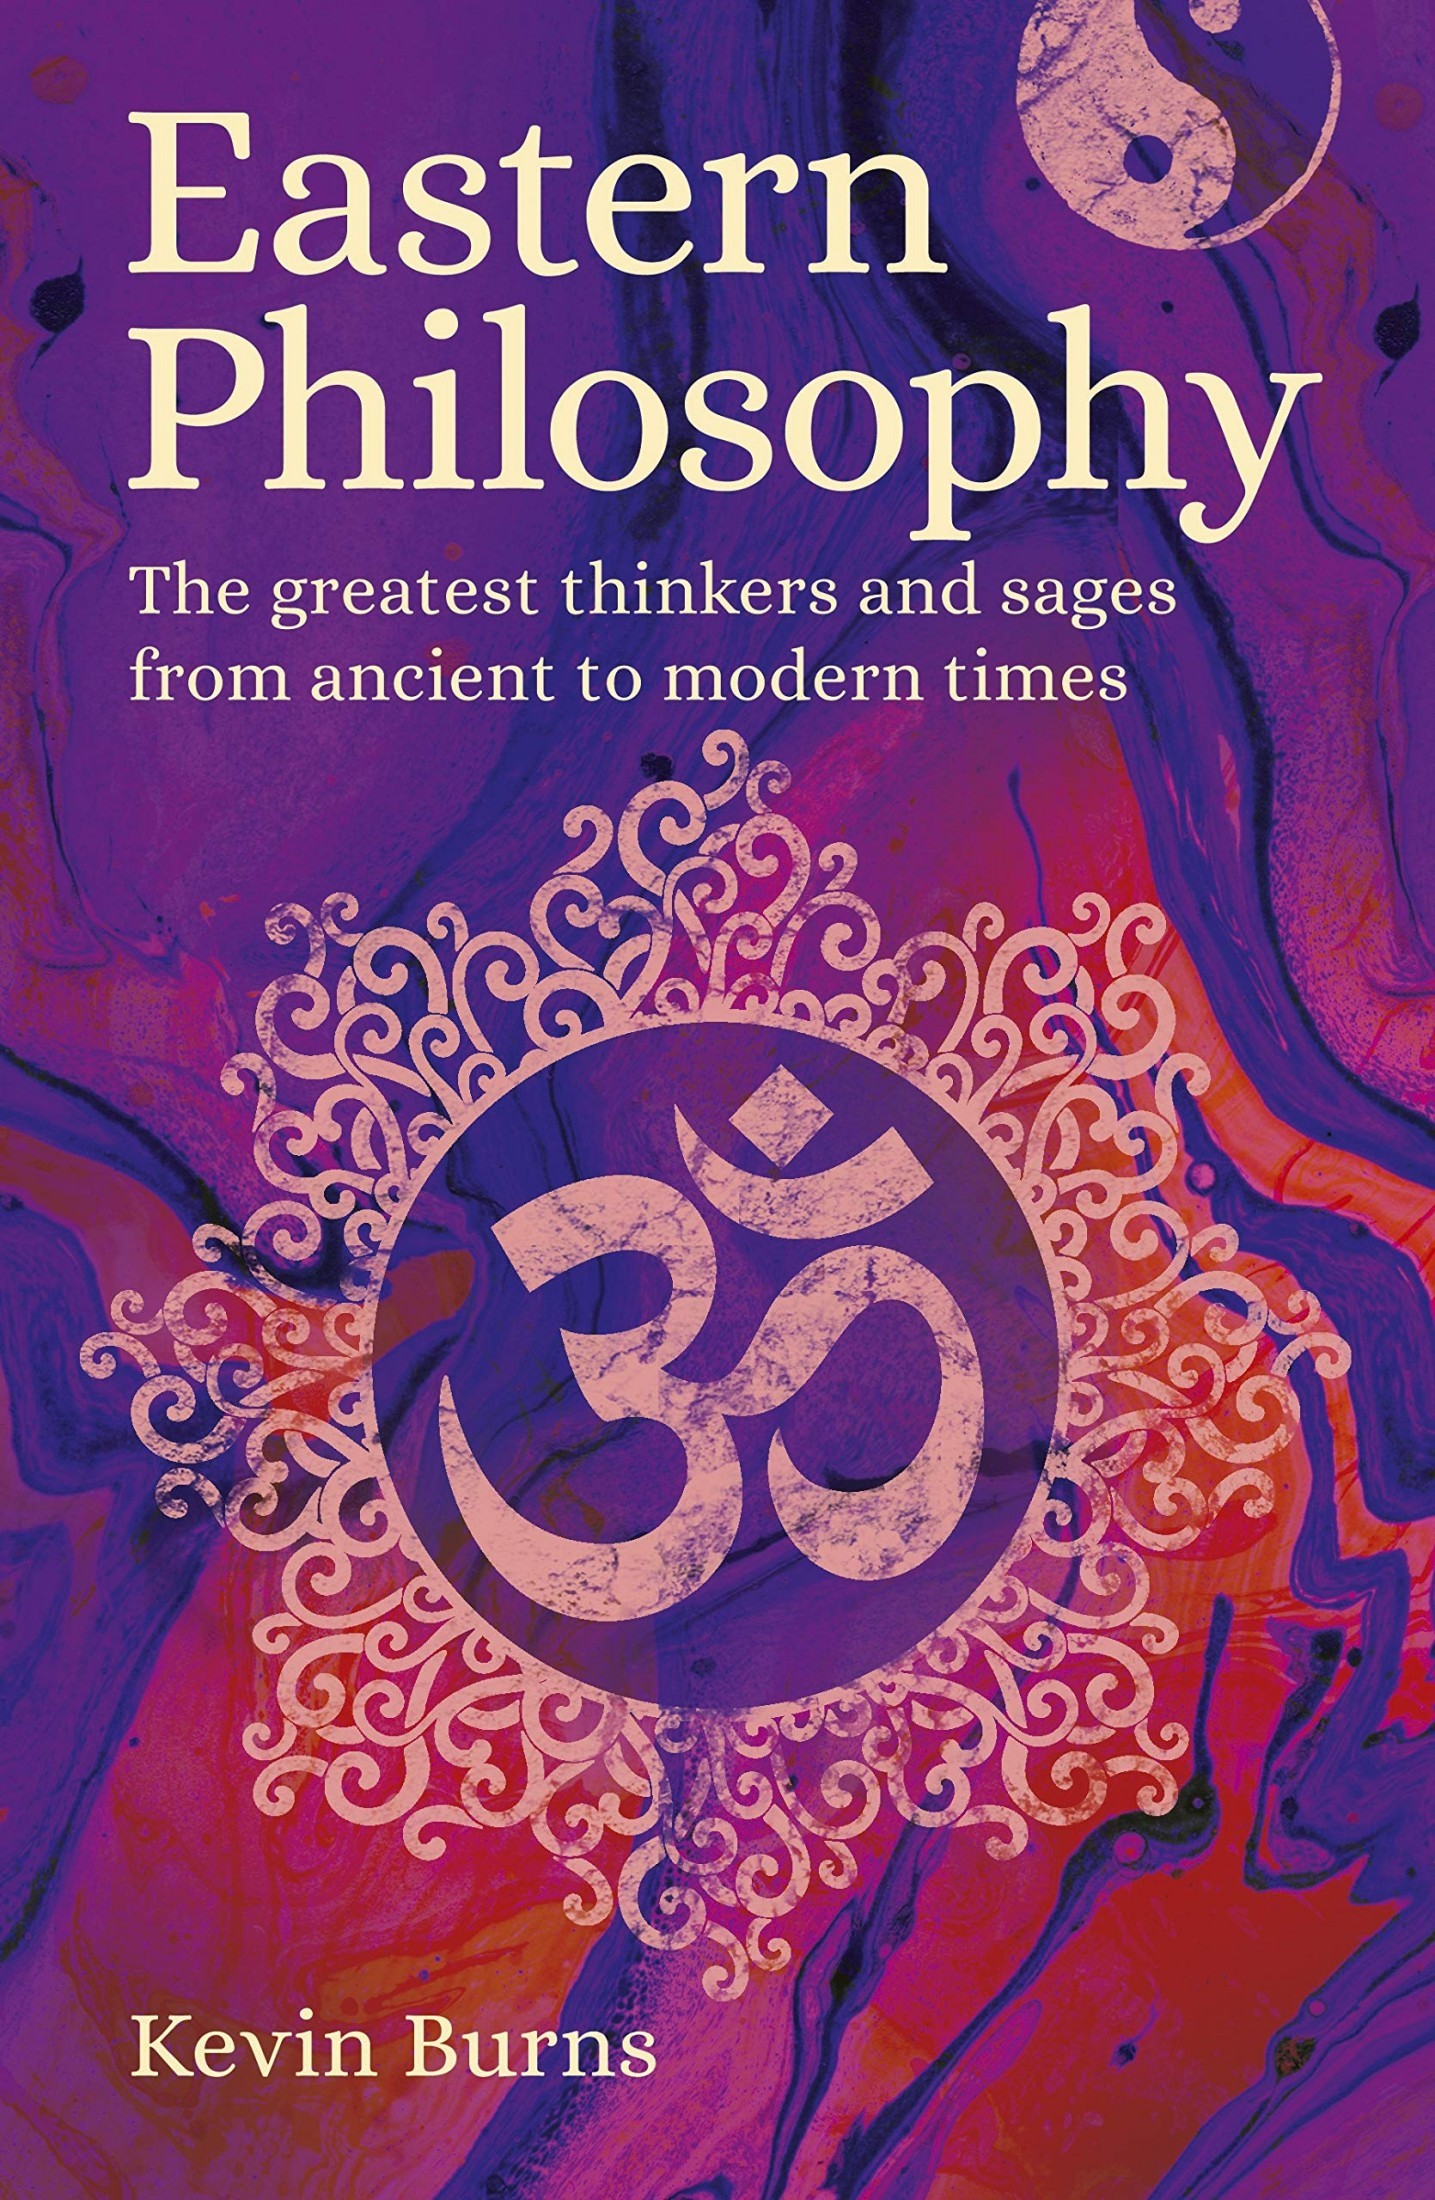 Eastern Philosophy: The Greatest Thinkers and Sages From Ancient to Modern Times